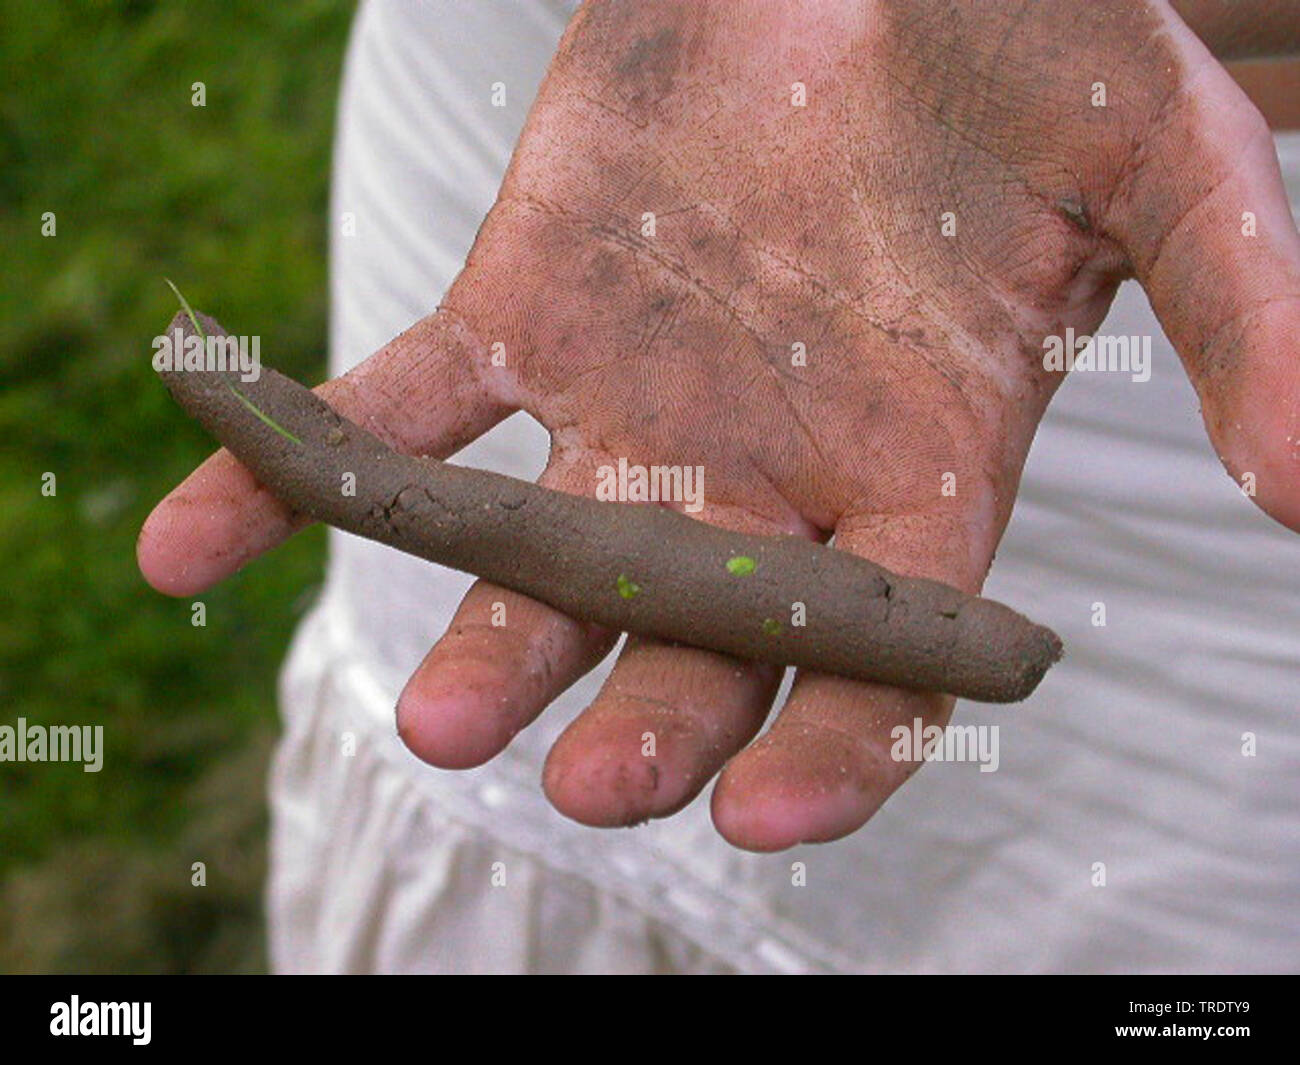 soil sample with high percentage of clay soil investigation, Germany Stock Photo